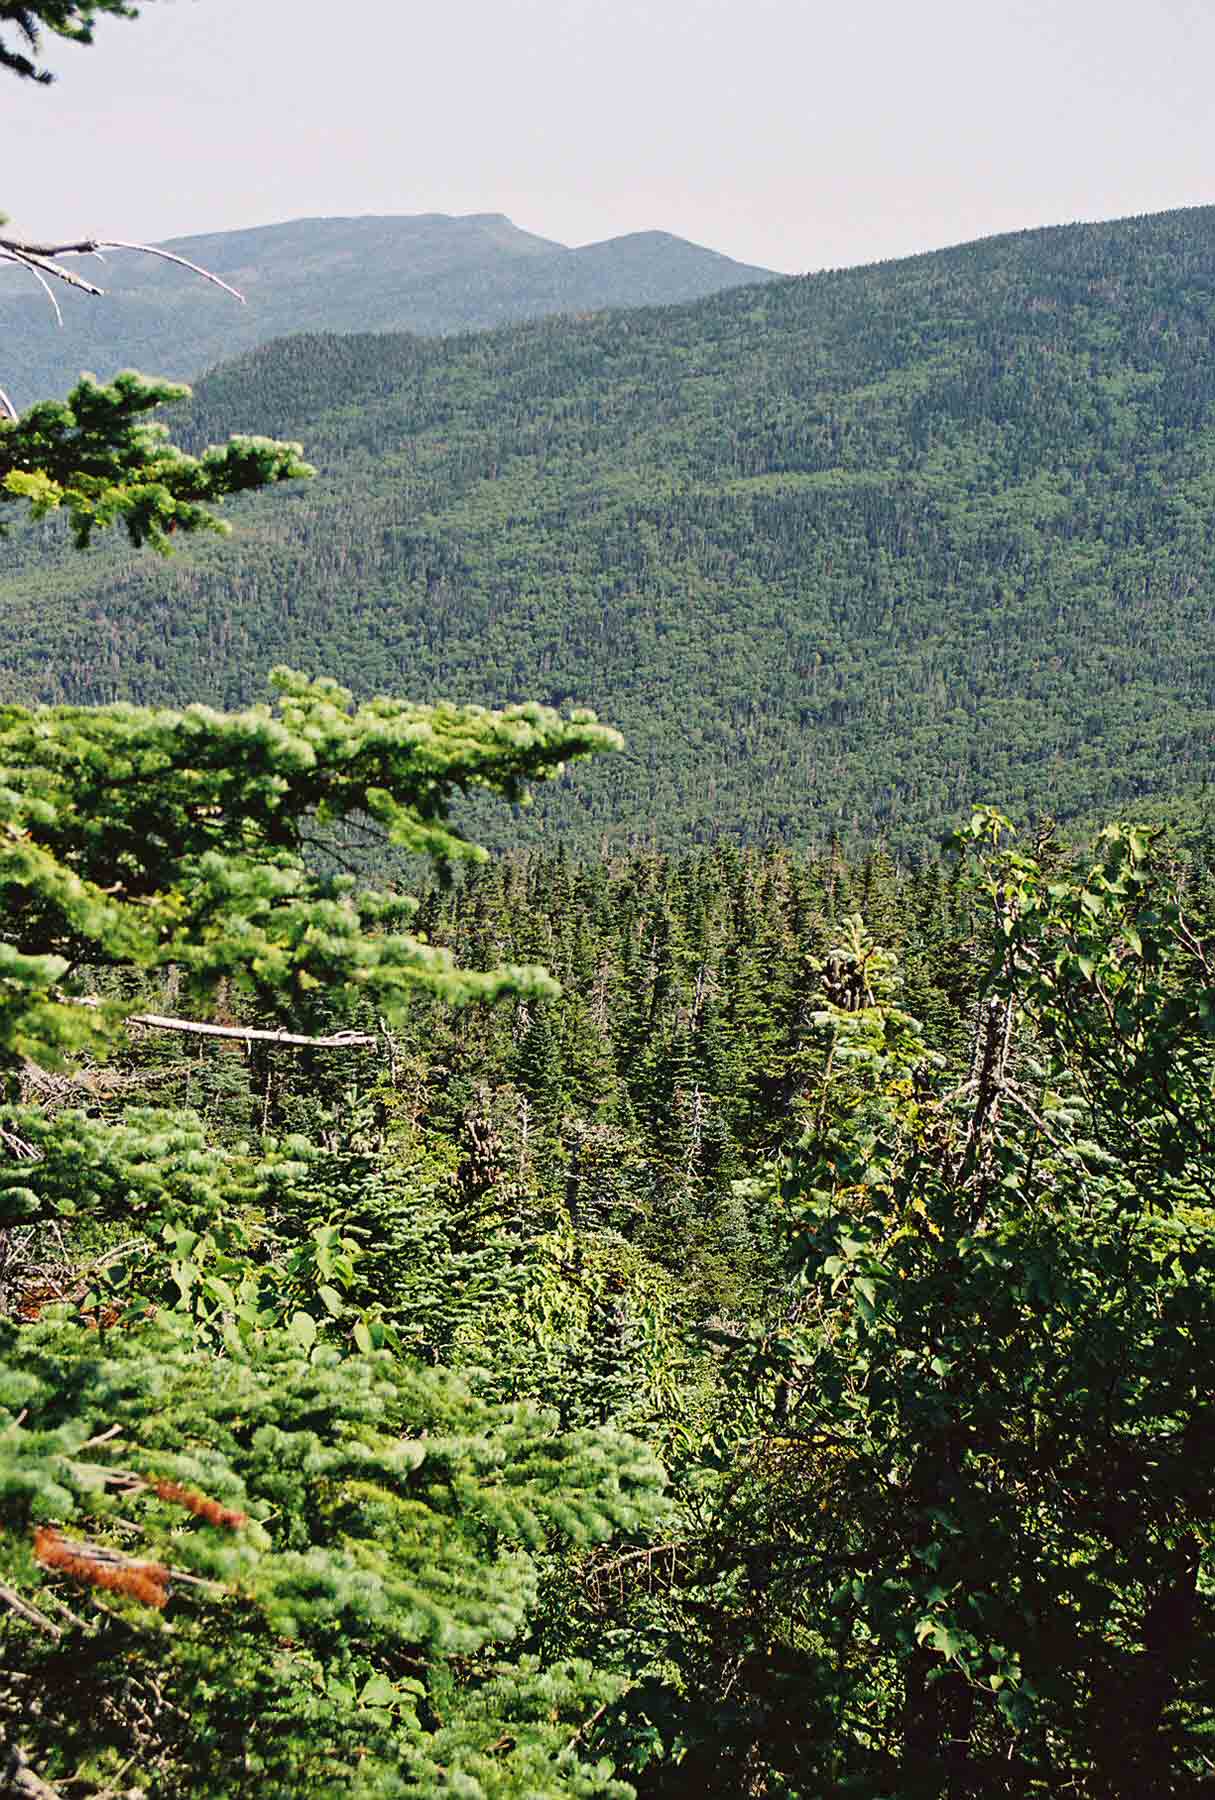 mm 18.1 - Looking south from observation tower on Wildcat D (Aug '04). Courtesy dlcul@conncoll.edu